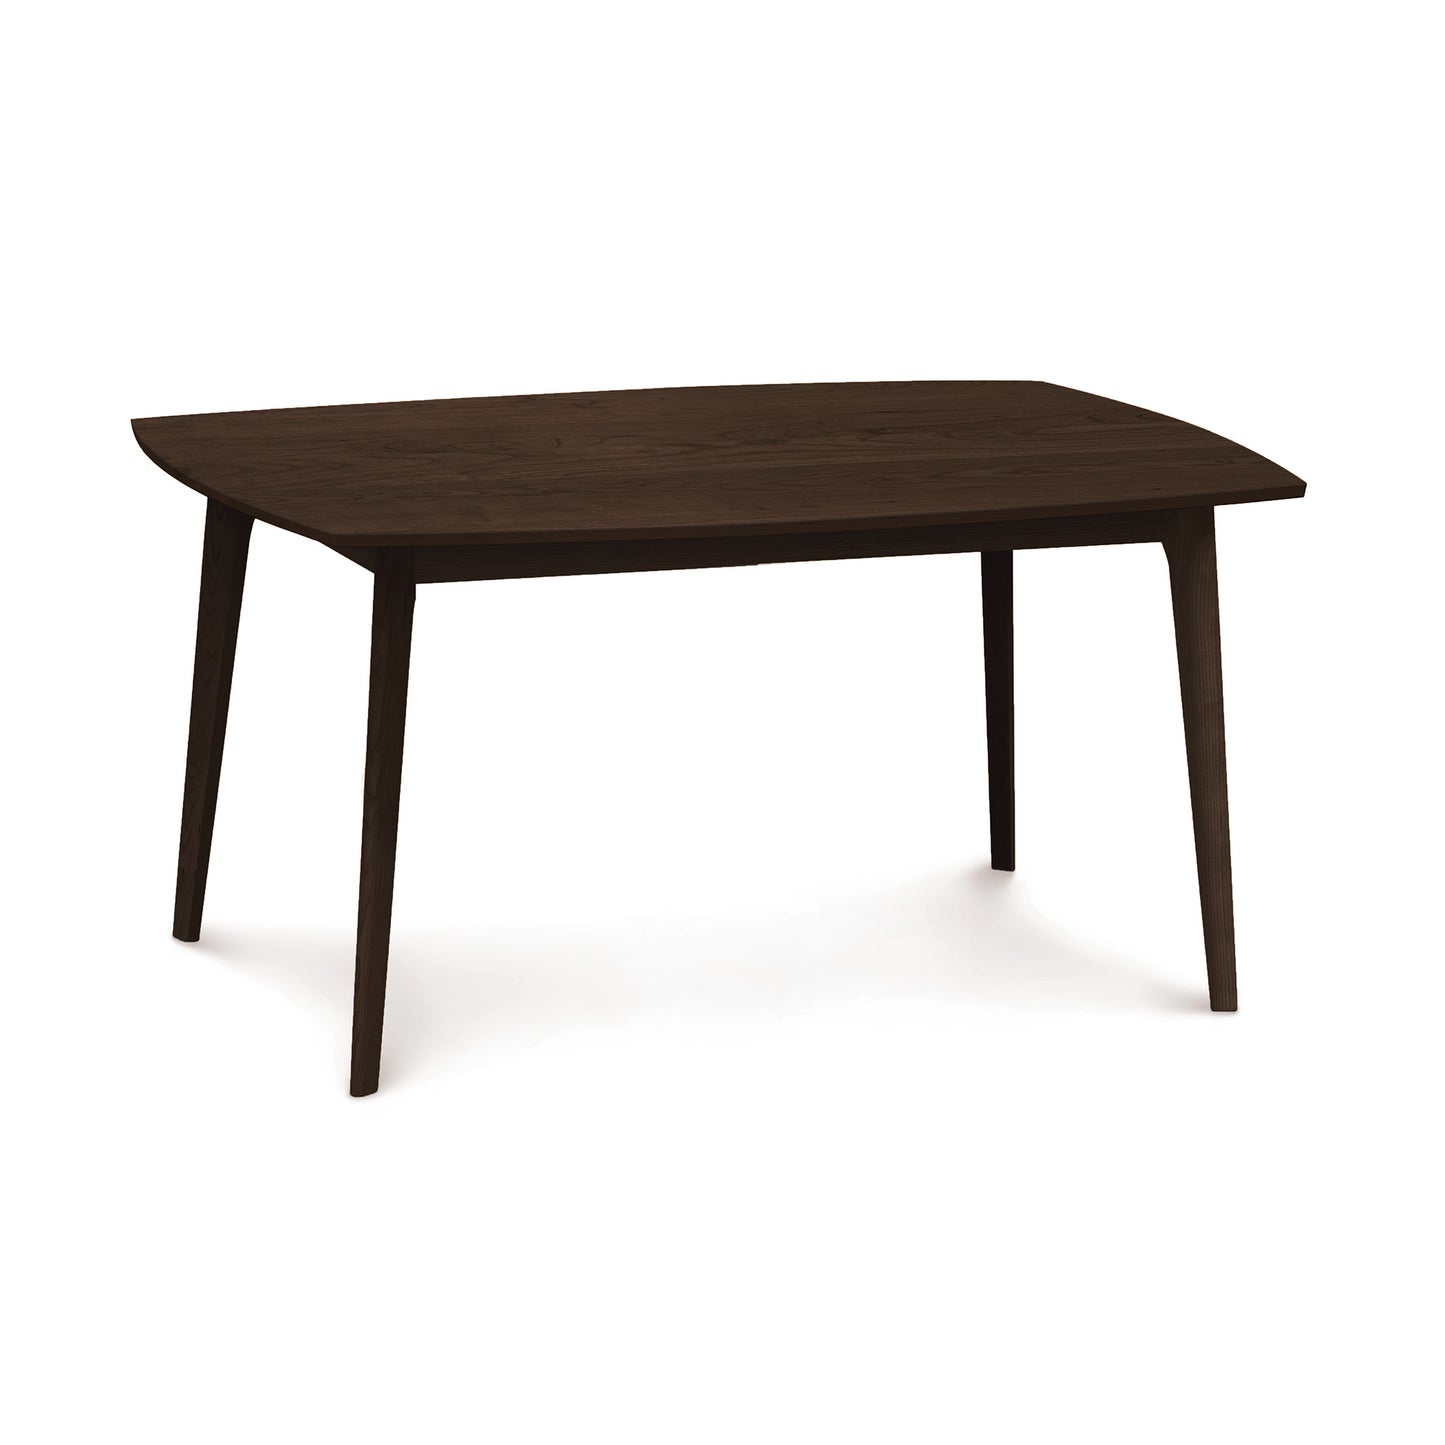 A Copeland Furniture Catalina Solid-Top Table, crafted from sustainably-sourced hardwoods, with a dark brown finish and tapered legs, photographed against a white background.